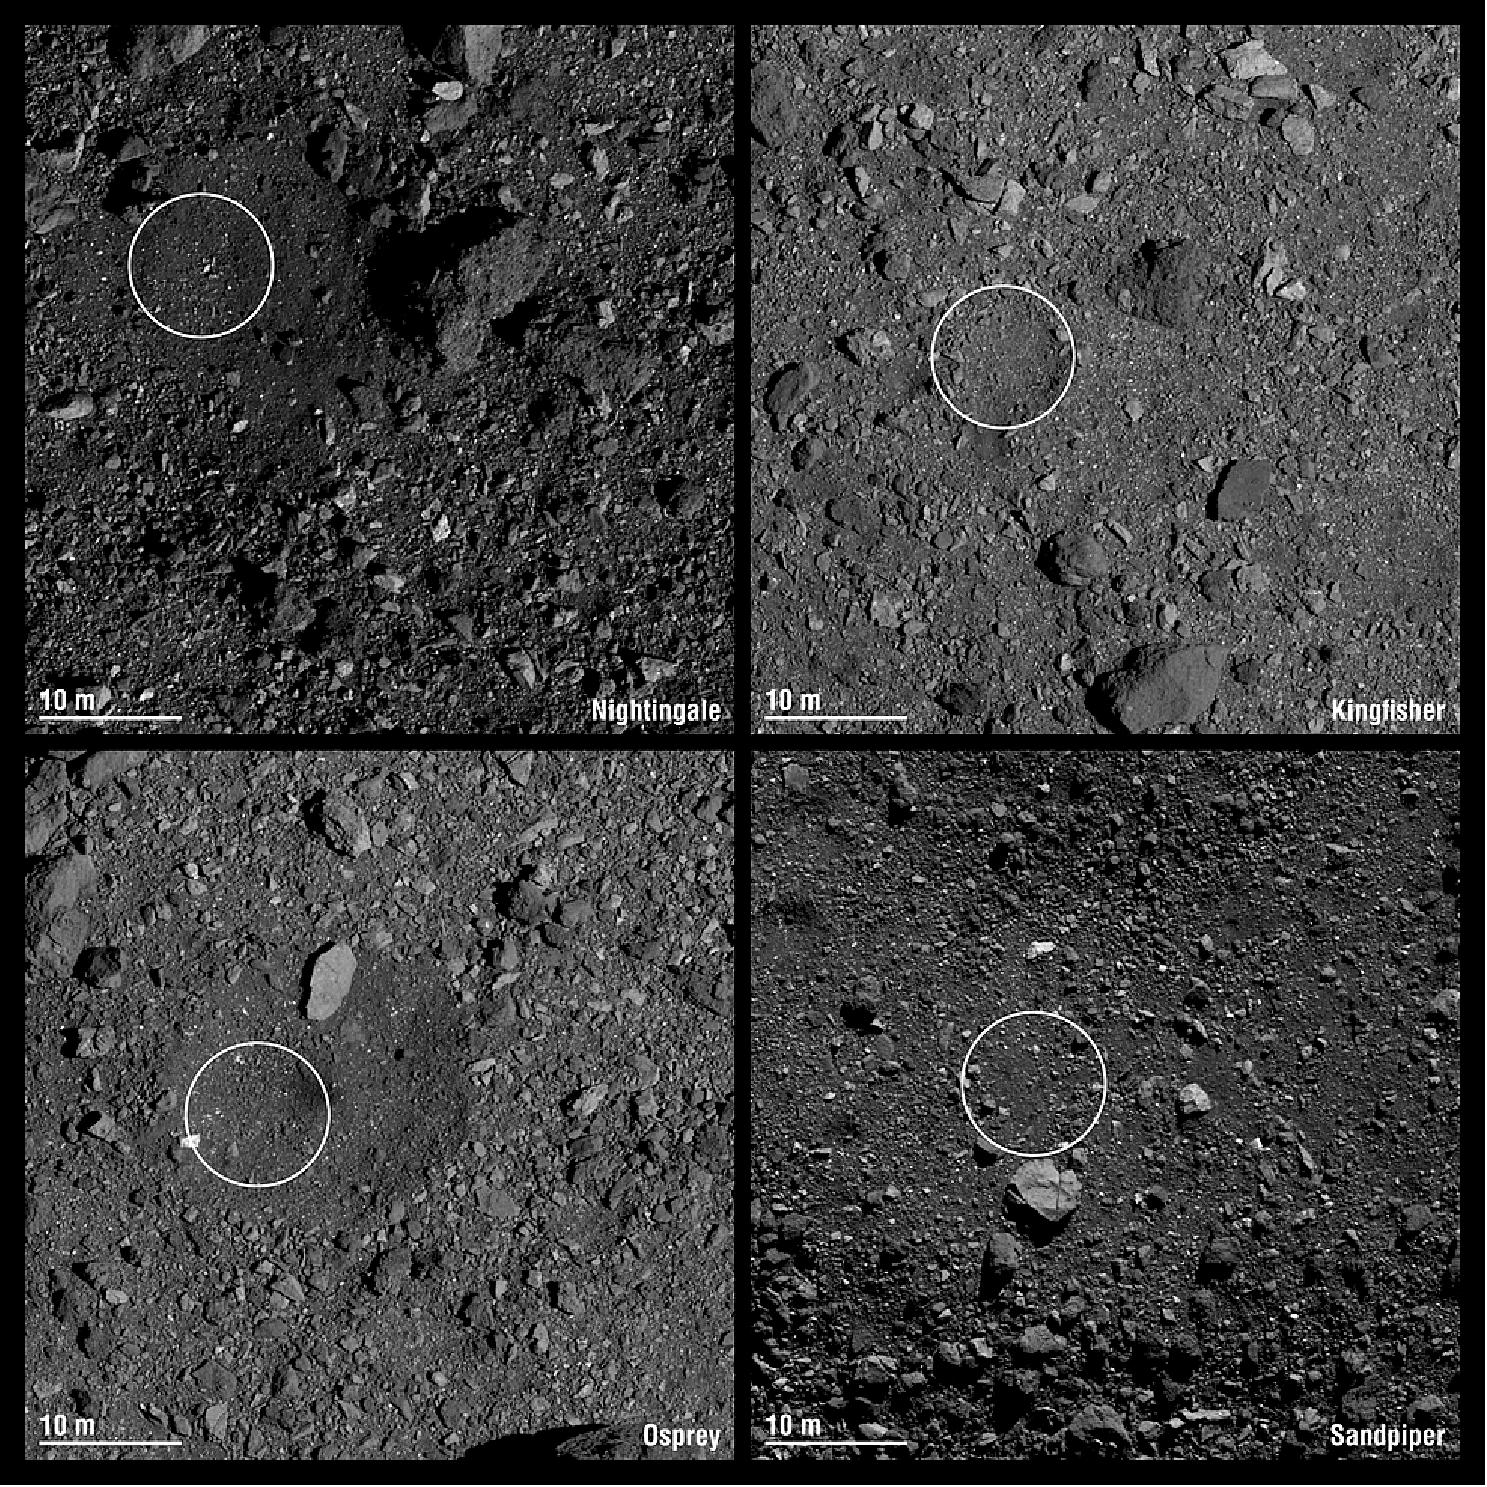 Figure 51: Pictured are the four candidate sample collection sites on asteroid Bennu selected by NASA’s OSIRIS-REx mission. Site Nightingale (top left) is located in Bennu’s northern hemisphere. Sites Kingfisher (top right) and Osprey (bottom left) are located in Bennu’s equatorial region. Site Sandpiper (bottom right) is located in Bennu’s southern hemisphere. In December, one of these sites will be chosen for the mission’s touchdown event (image credit: NASA/University of Arizona)